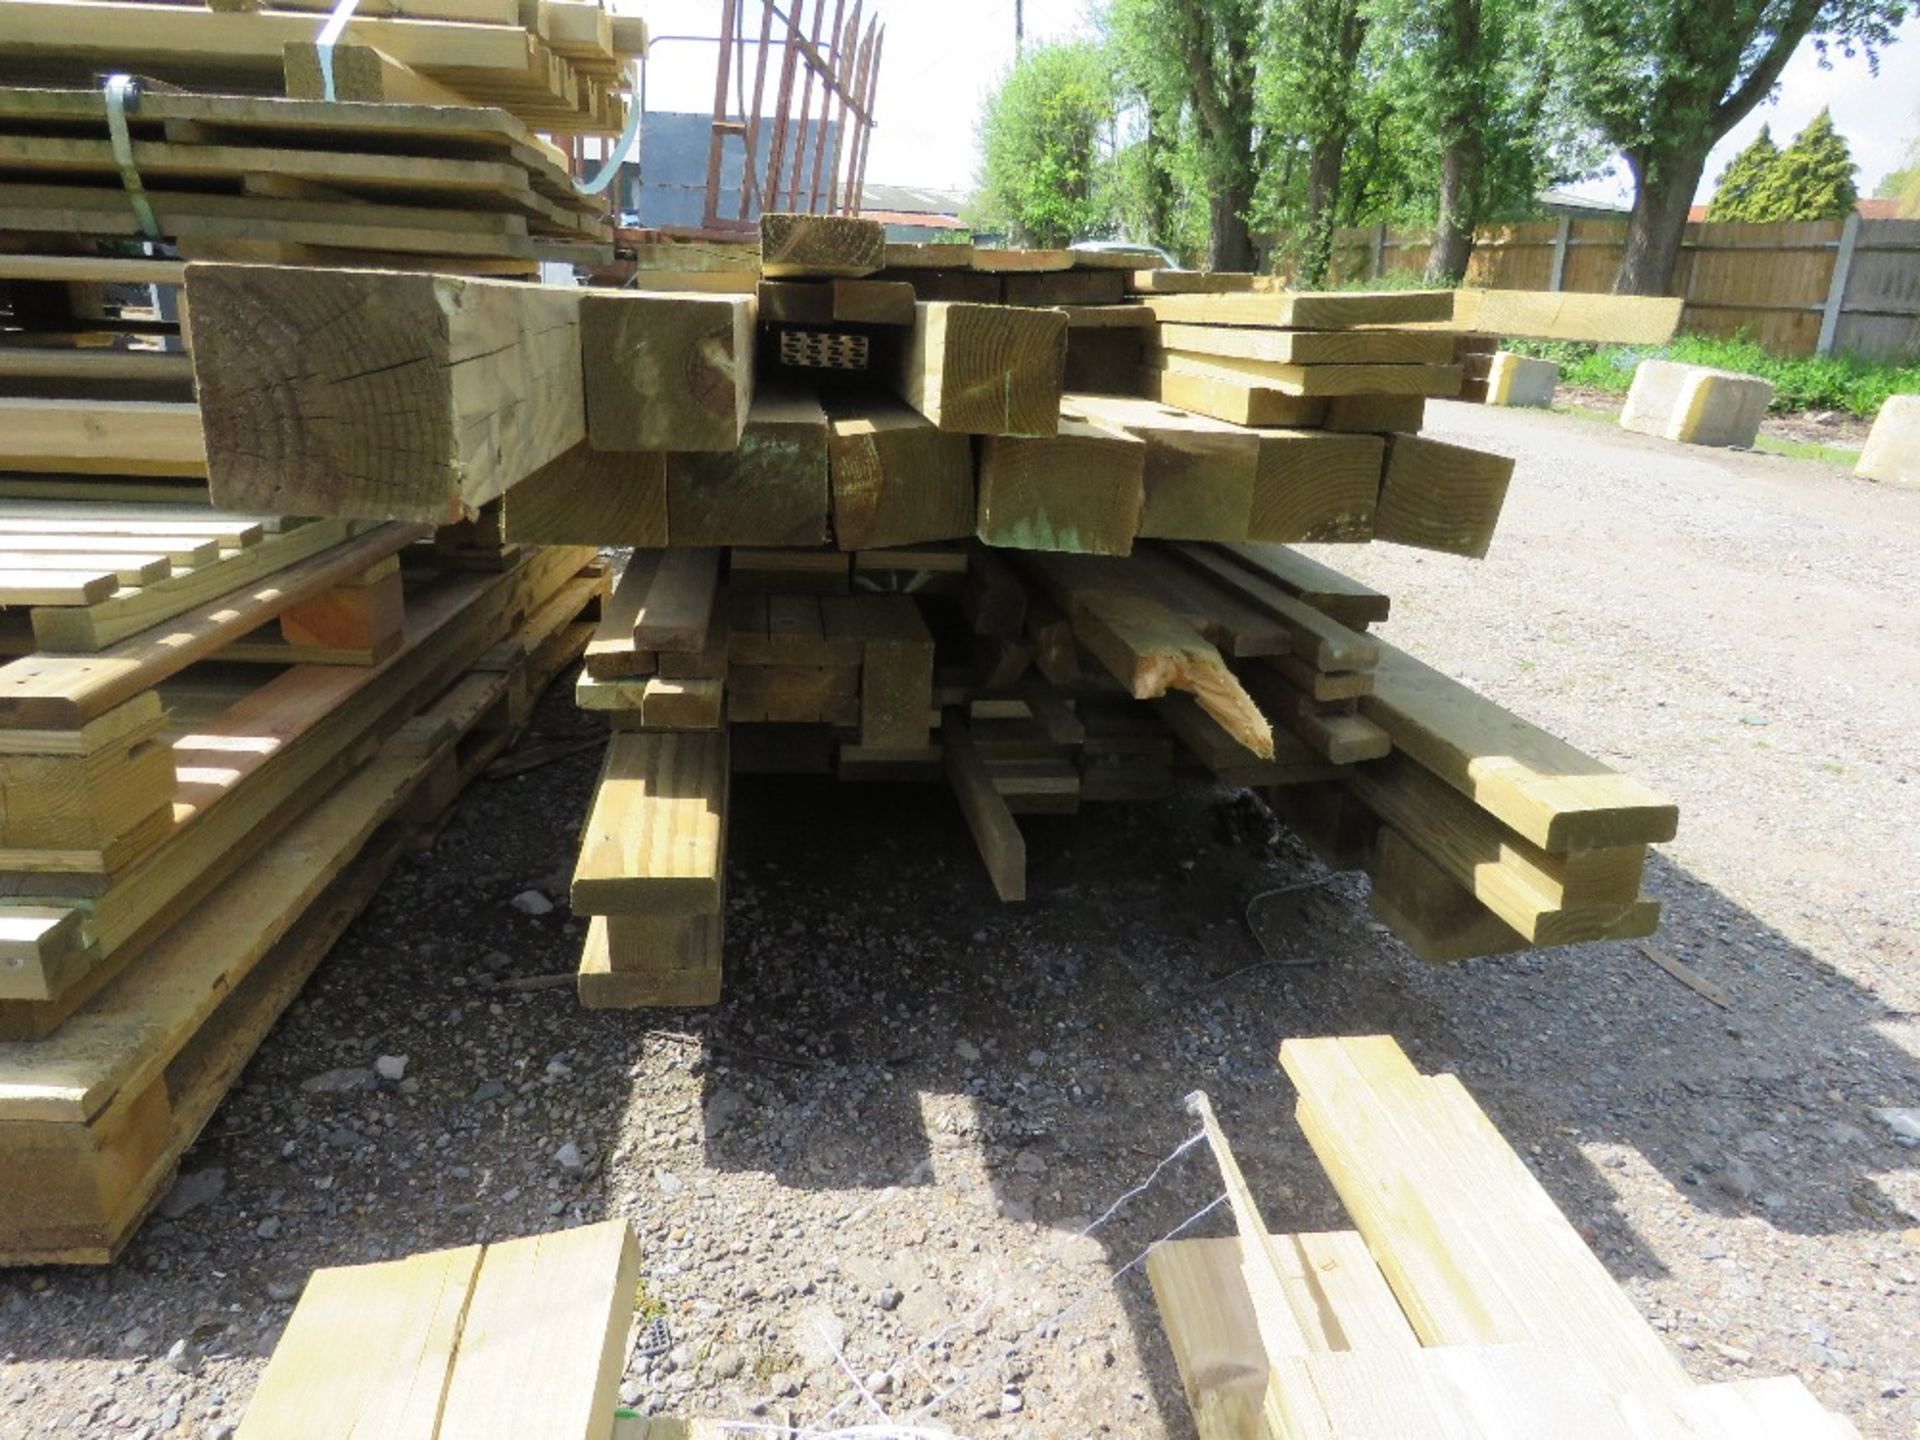 2 X BUNDLES OF TREATED FENCING TIMBERS, POSTS AND BOARDS AS SHOWN, 7-10FT LENGTH APPROX. - Image 5 of 5